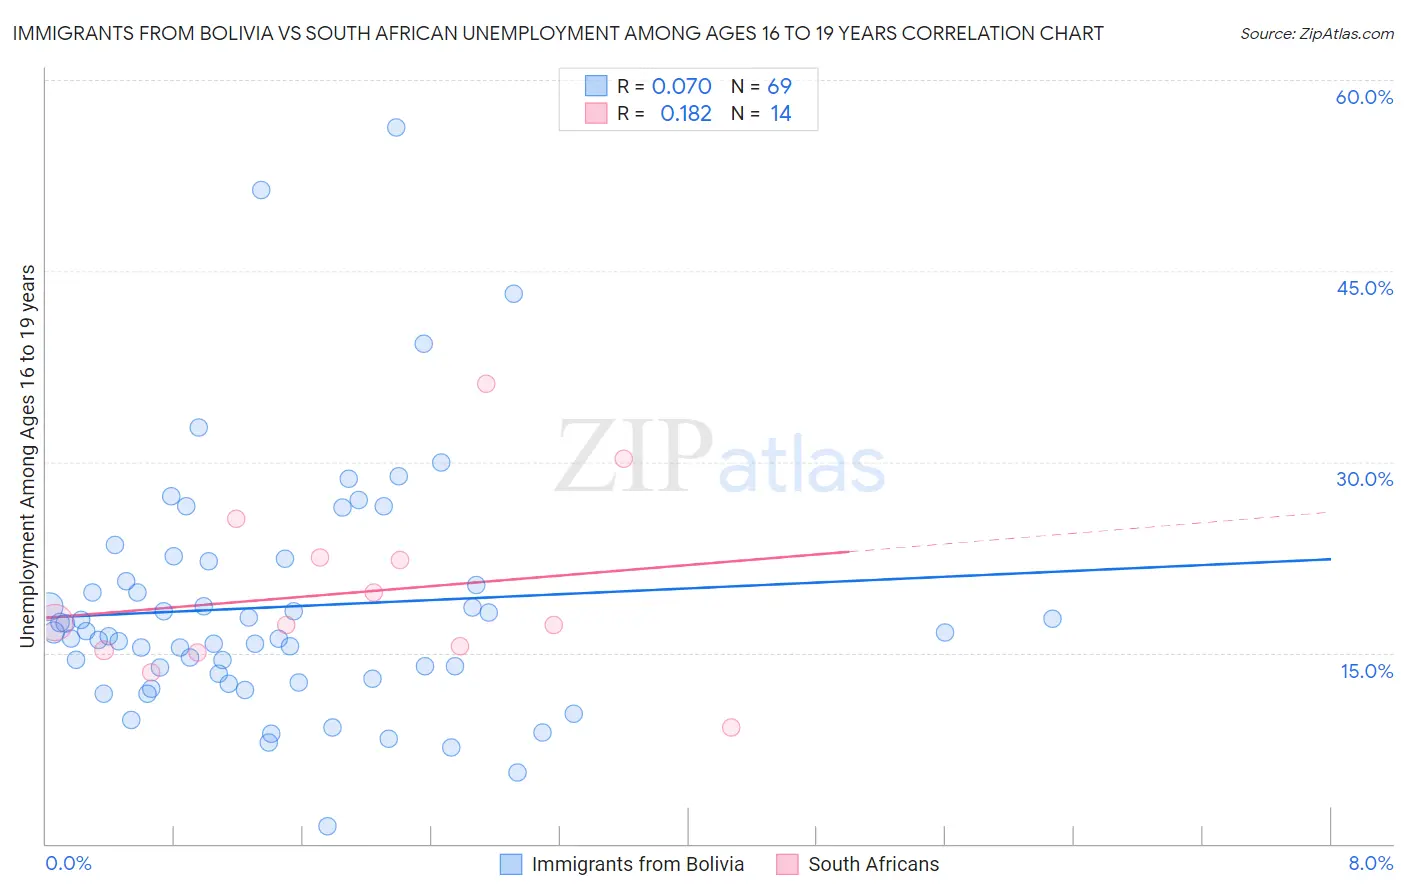 Immigrants from Bolivia vs South African Unemployment Among Ages 16 to 19 years